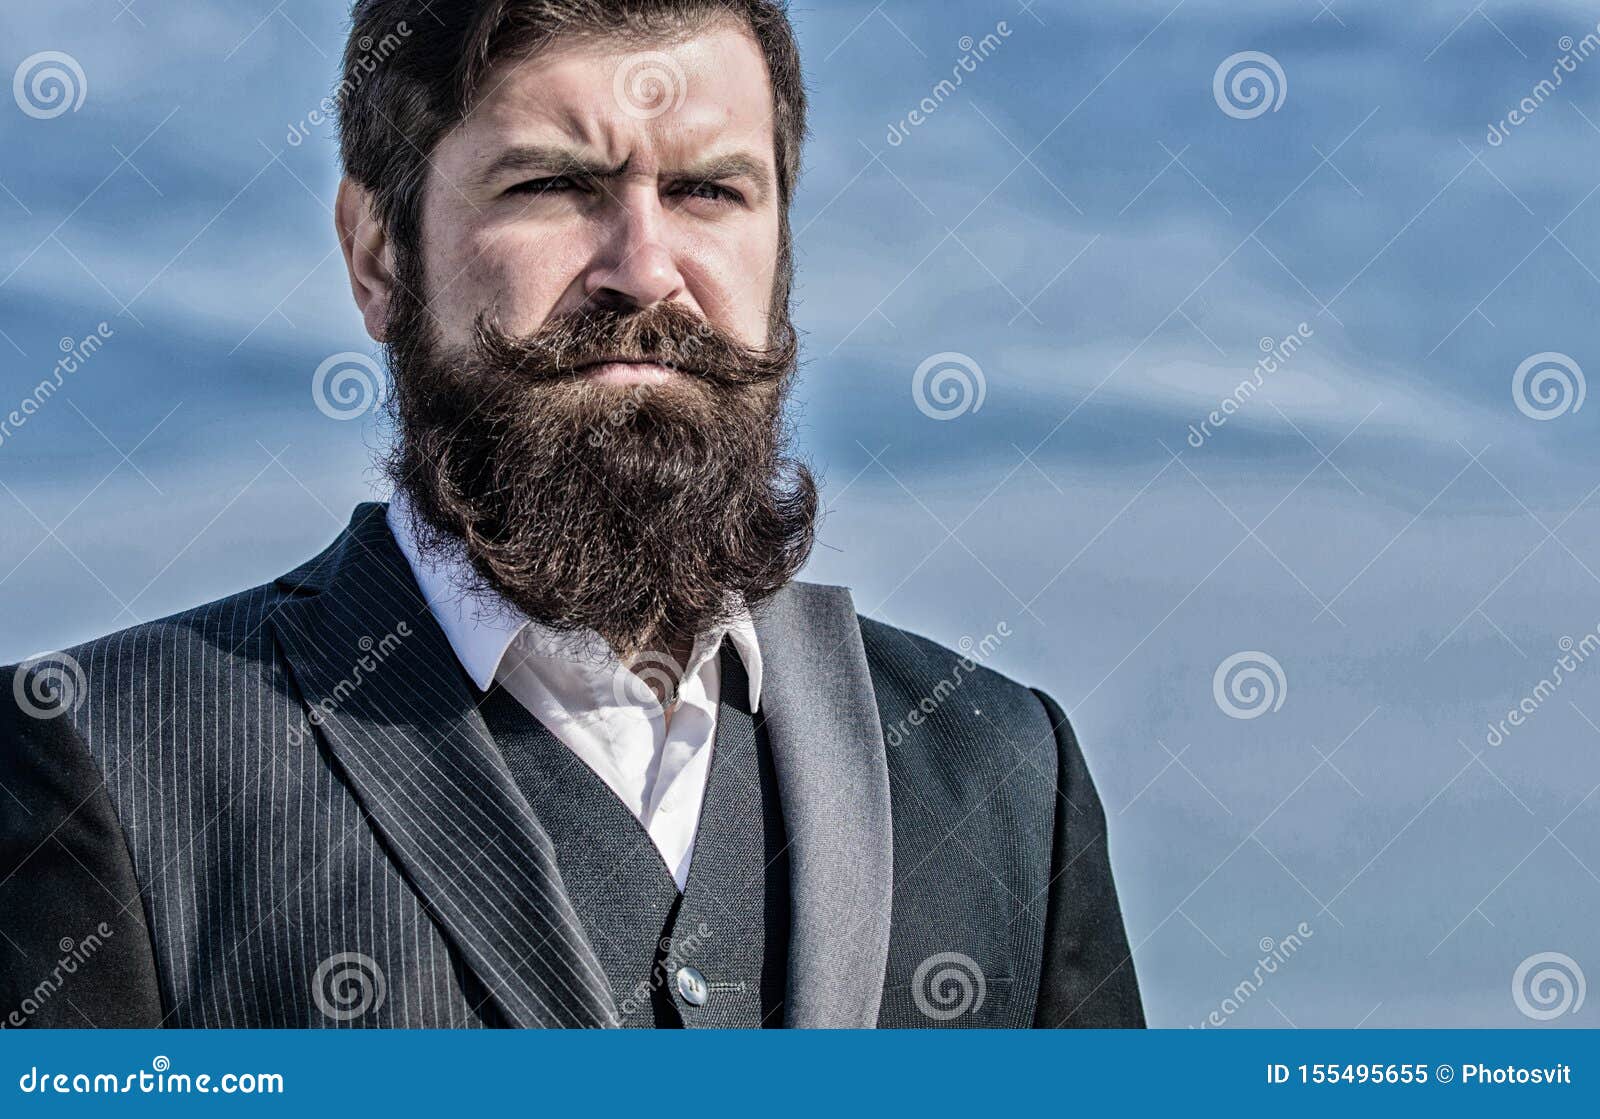 Vintage Style Long Beard. Facial Hair Beard and Mustache Care. Beard Fashion  Trend. Invest in Stylish Appearance Stock Image - Image of appearance,  long: 155495655